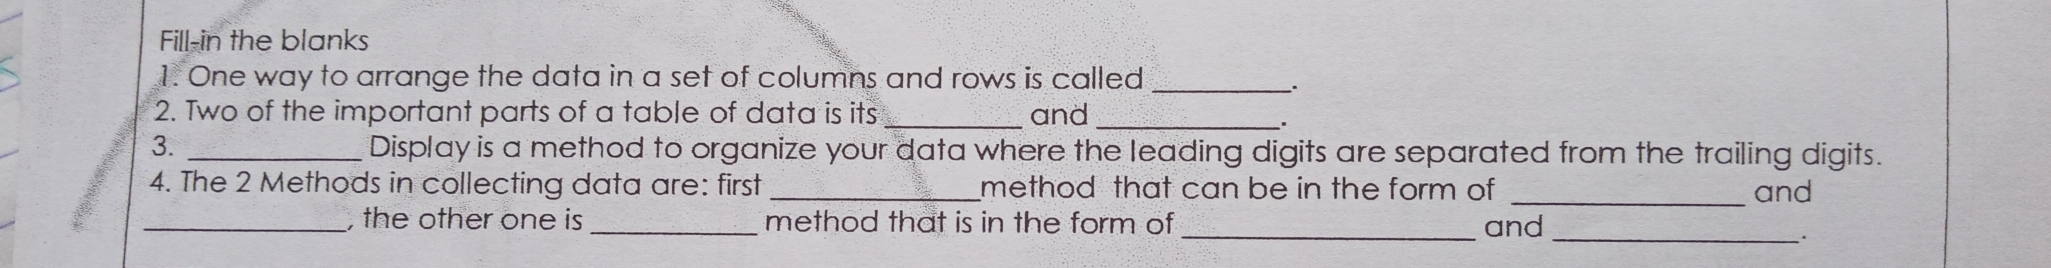 Fill-in the blanks 1. One way to arrange the data in a set of columns and rows is called . 2. Two of the important parts of a table of data is its and 3. Display is a method to organize your data where the leading digits are separated from the trailing digits. 4. The 2 Methods in collecting data are: first _method that can be in the form of and , the other one is_method that is in the form of and